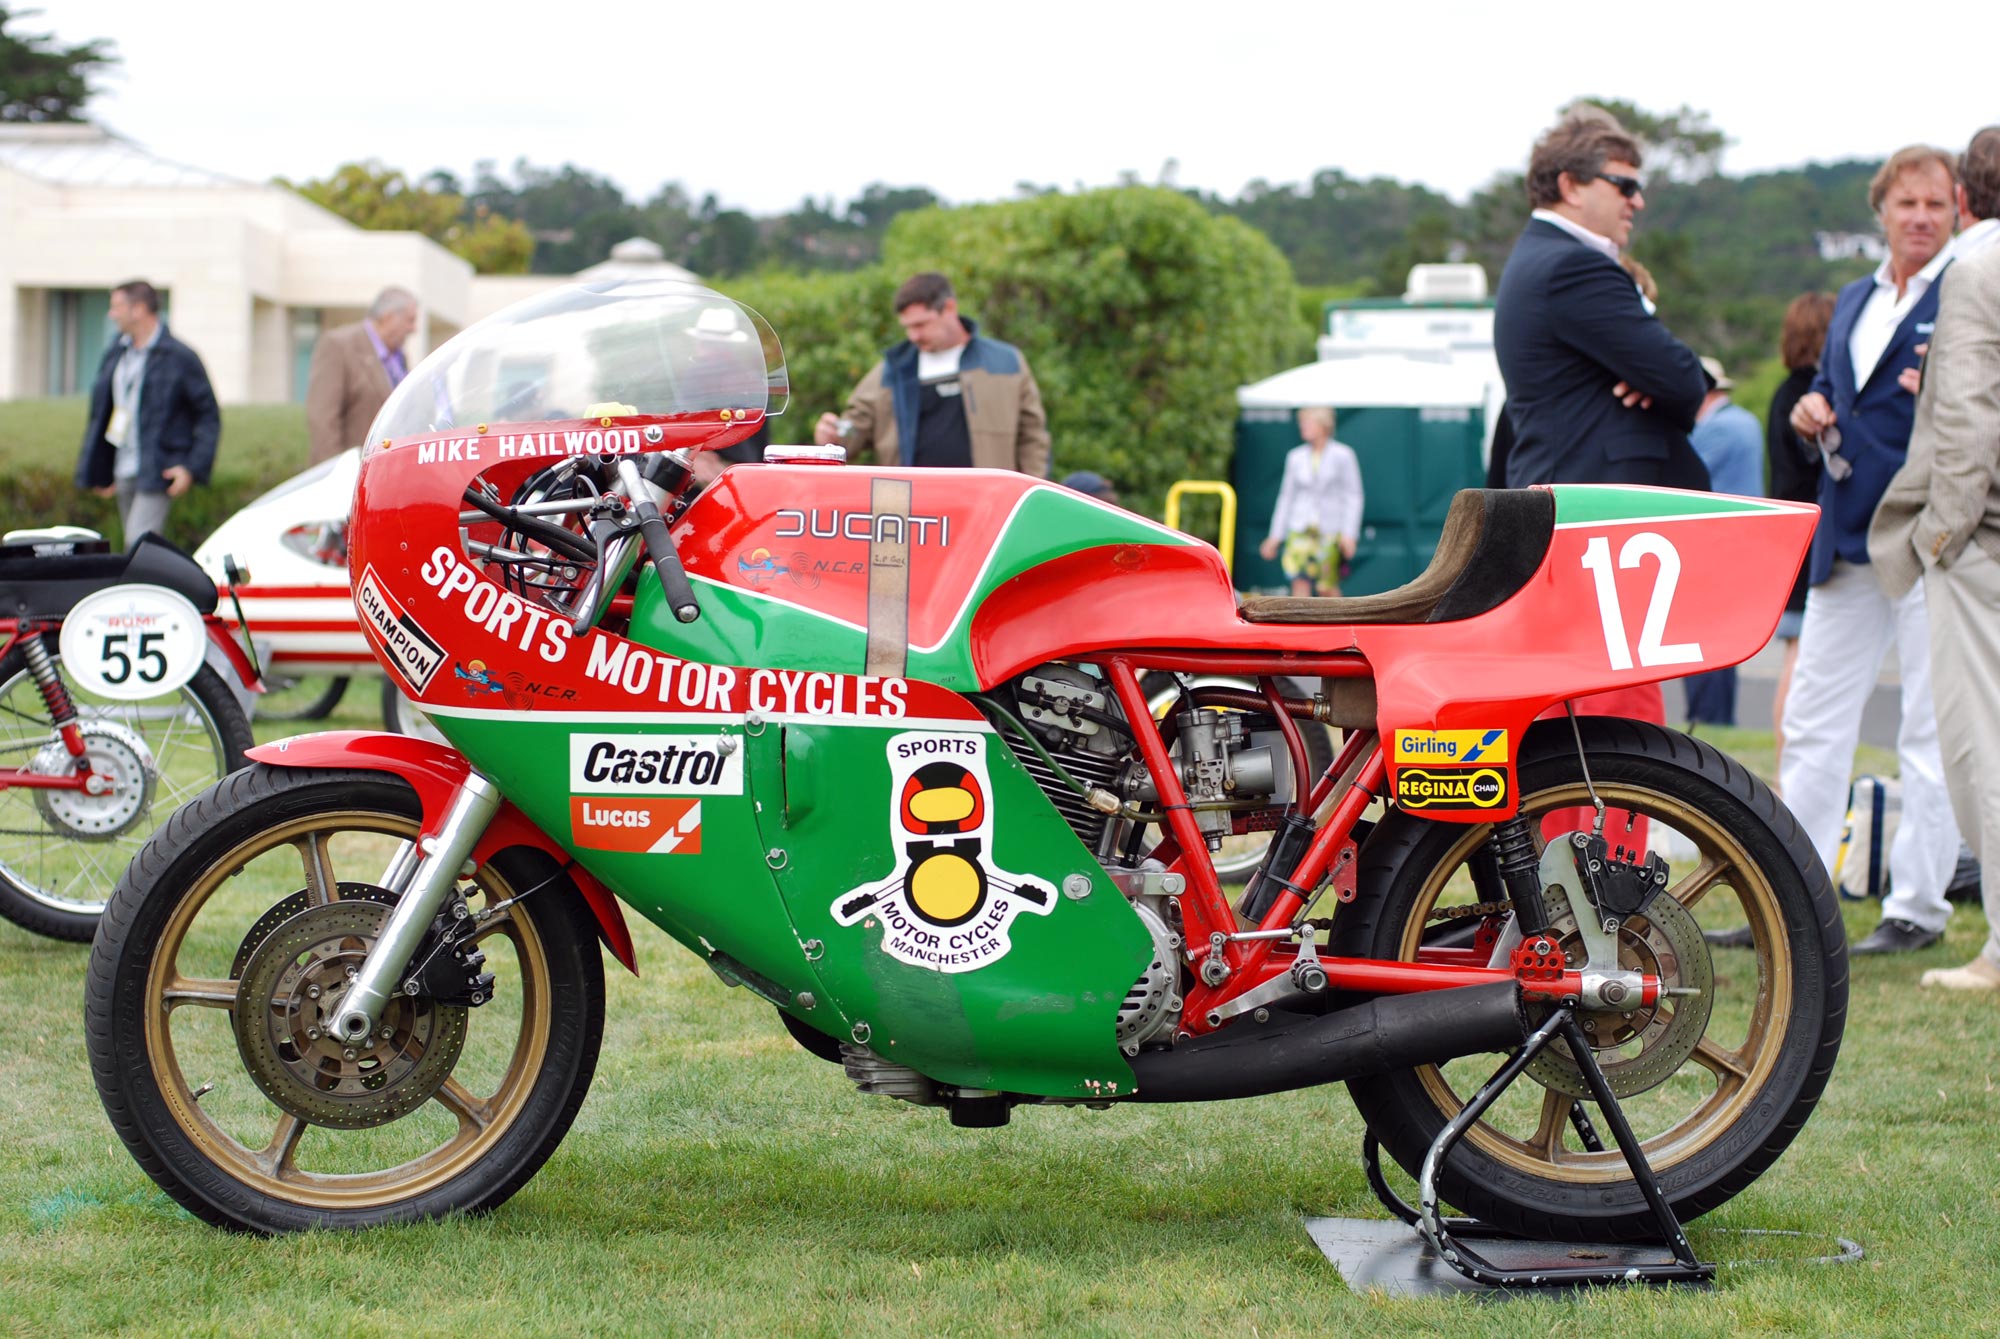 http://www.asphaltandrubber.com/wp-content/gallery/1978-ducati-900-ncr-mike-hailwood-race-bike-at-the-pebble-beach-concours-delegance/1978-ducati-900-ncr-mike-hailwood-pebble-beach-1.jpg